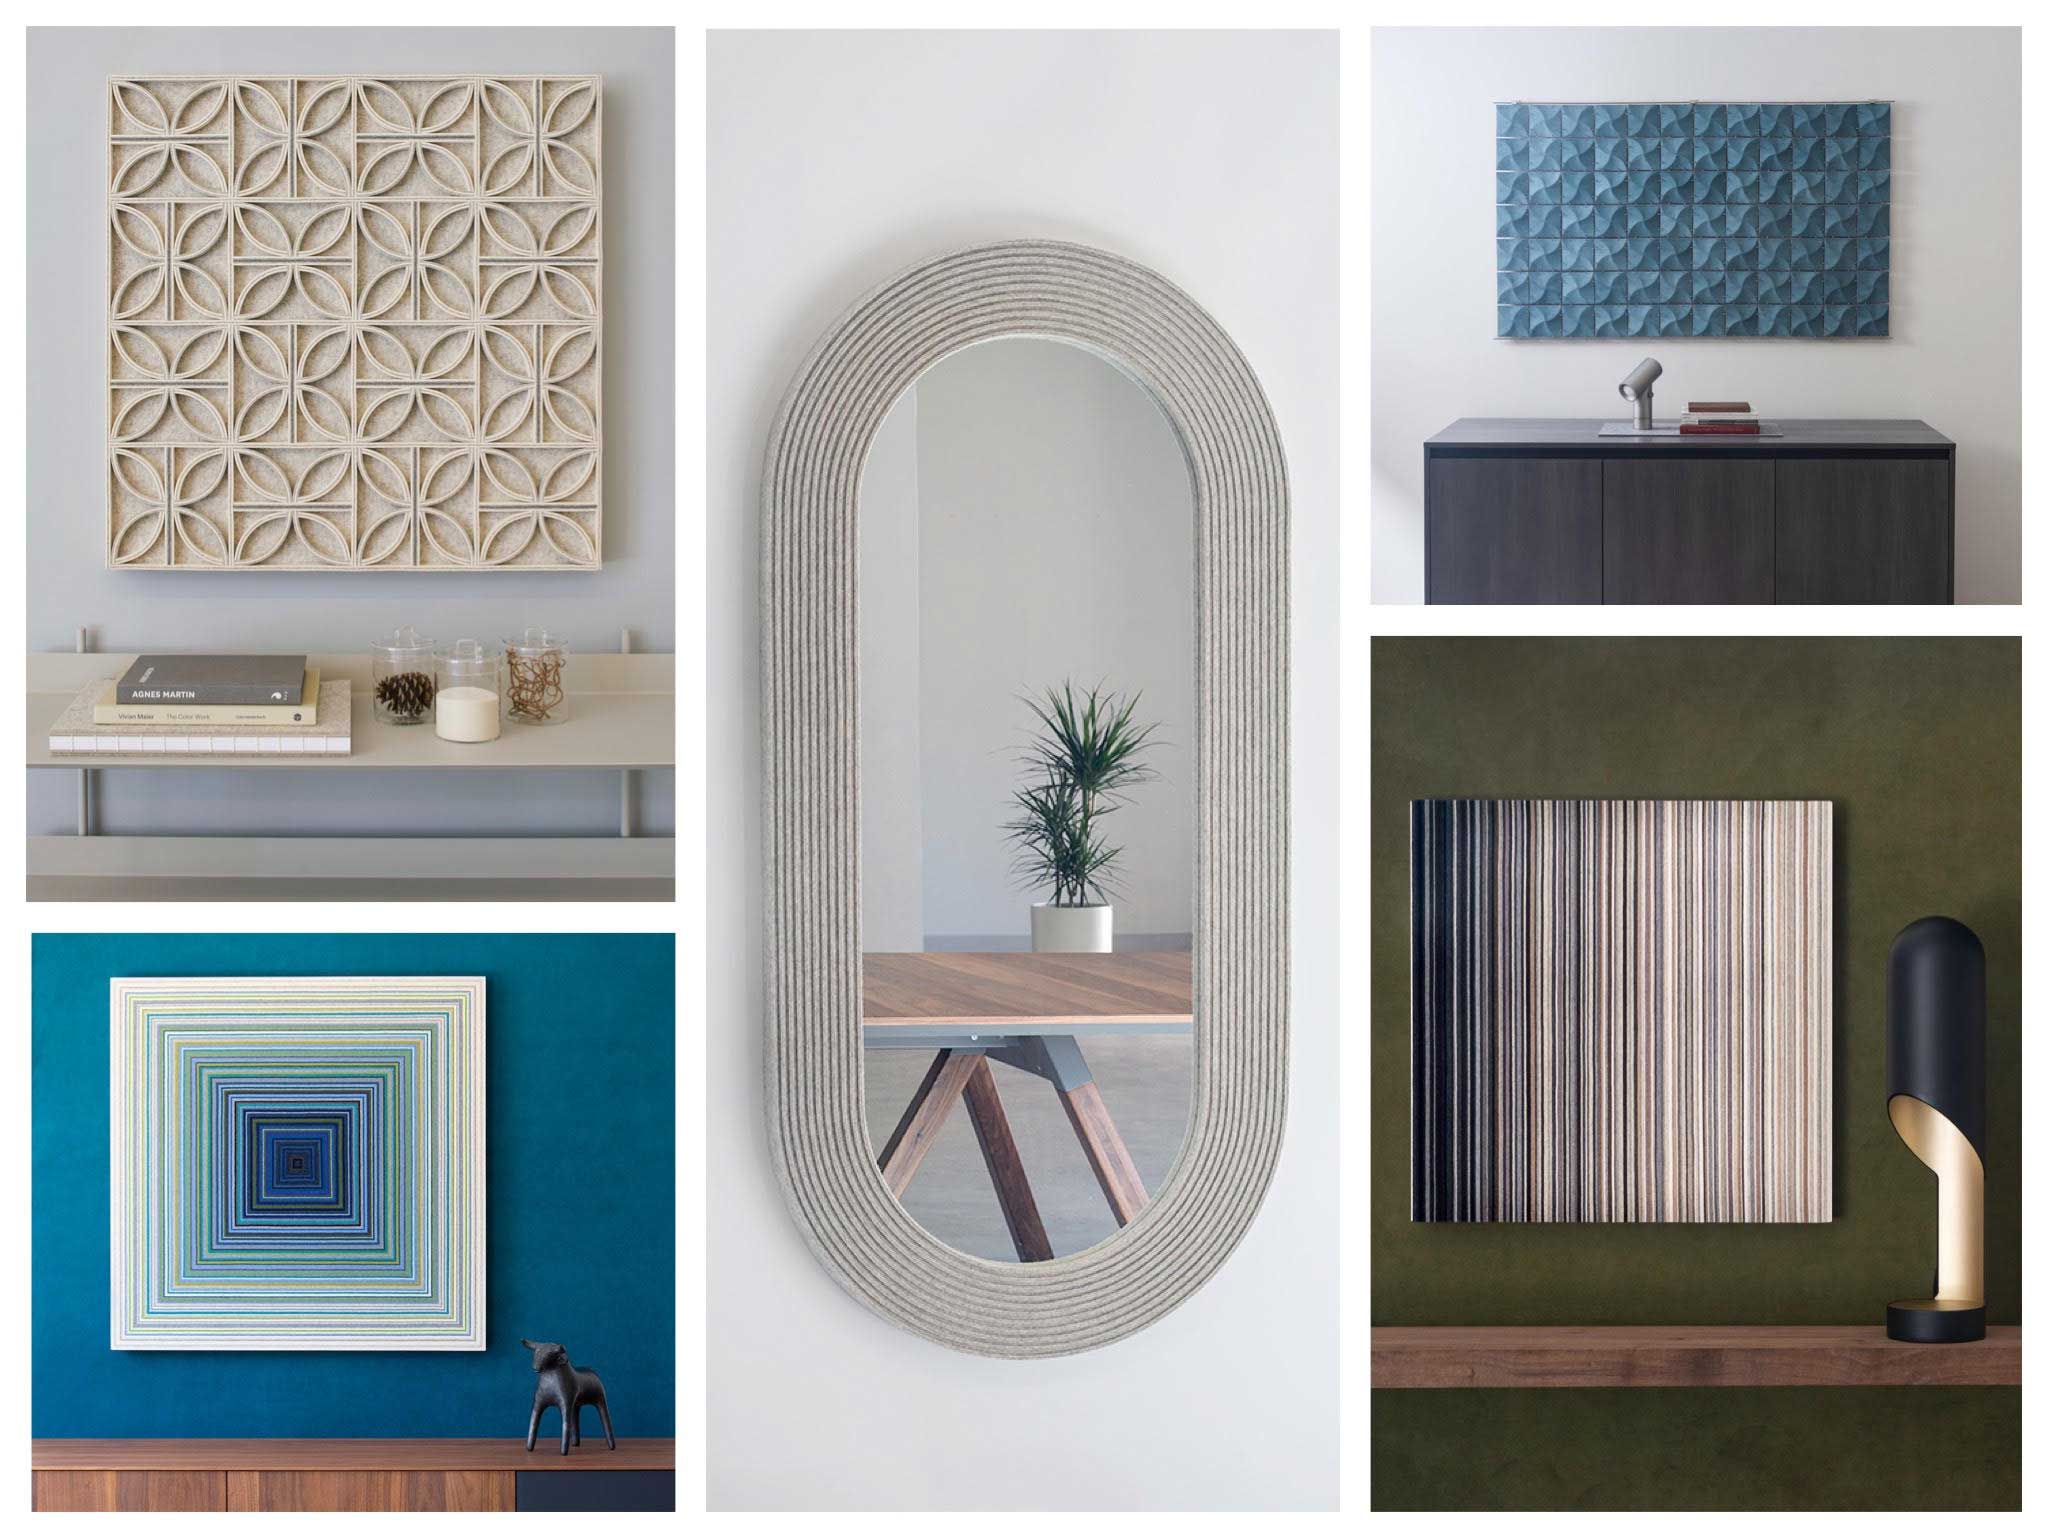 submaterial diade panel in white and grey, construct wallhanging in blue knoll ultrasuede, myth panel in striped wool felt, ojo panel in a blue gradient, and pill wander mirror